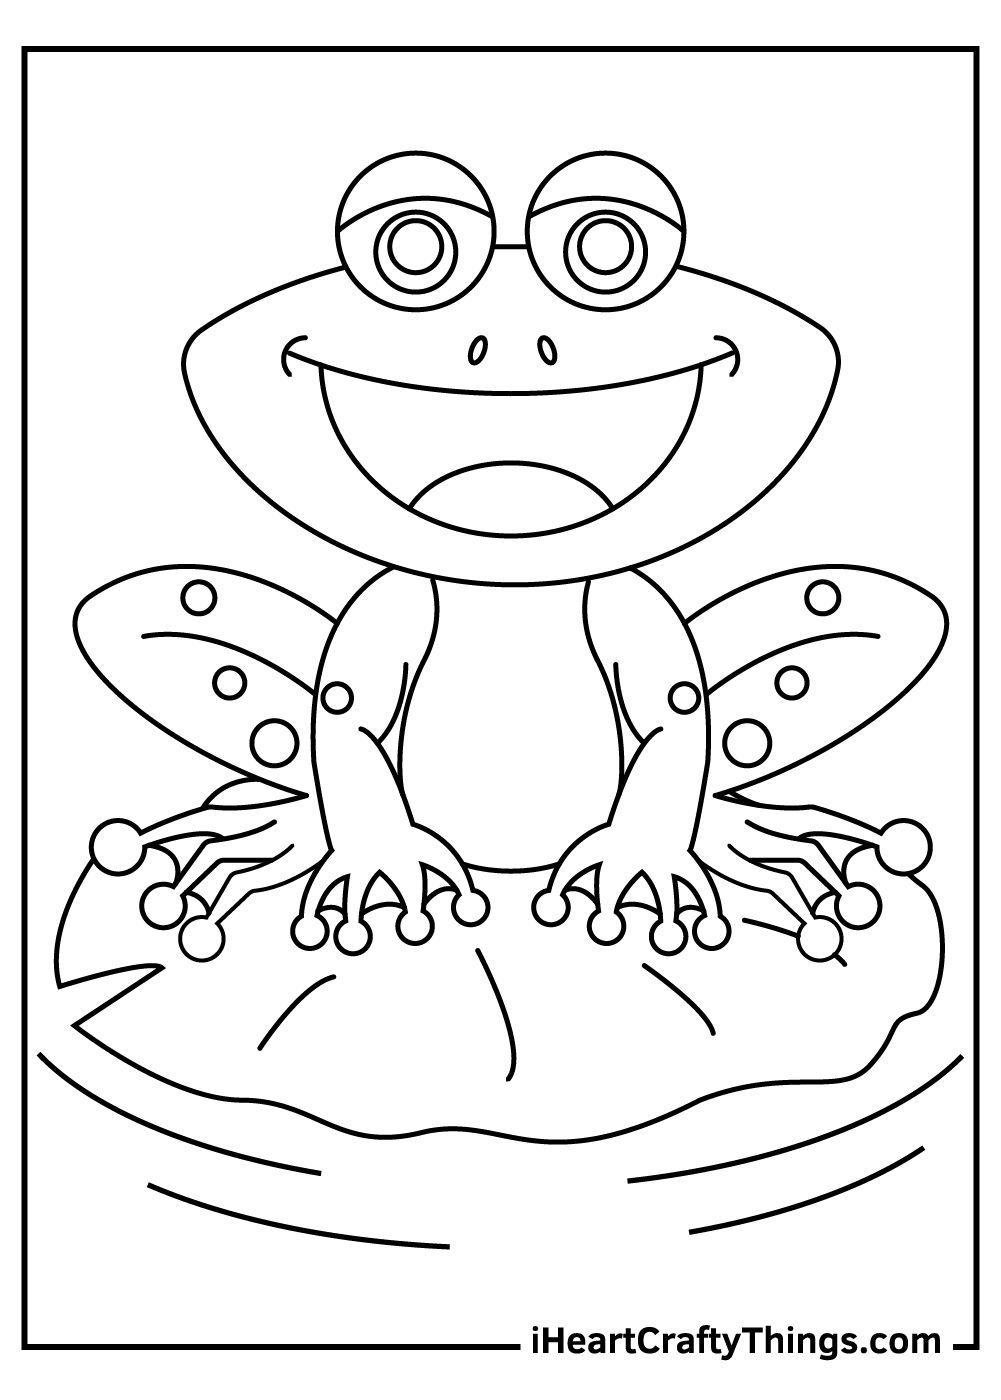 Frog coloring pages frog coloring pages cute coloring pages coloring pages